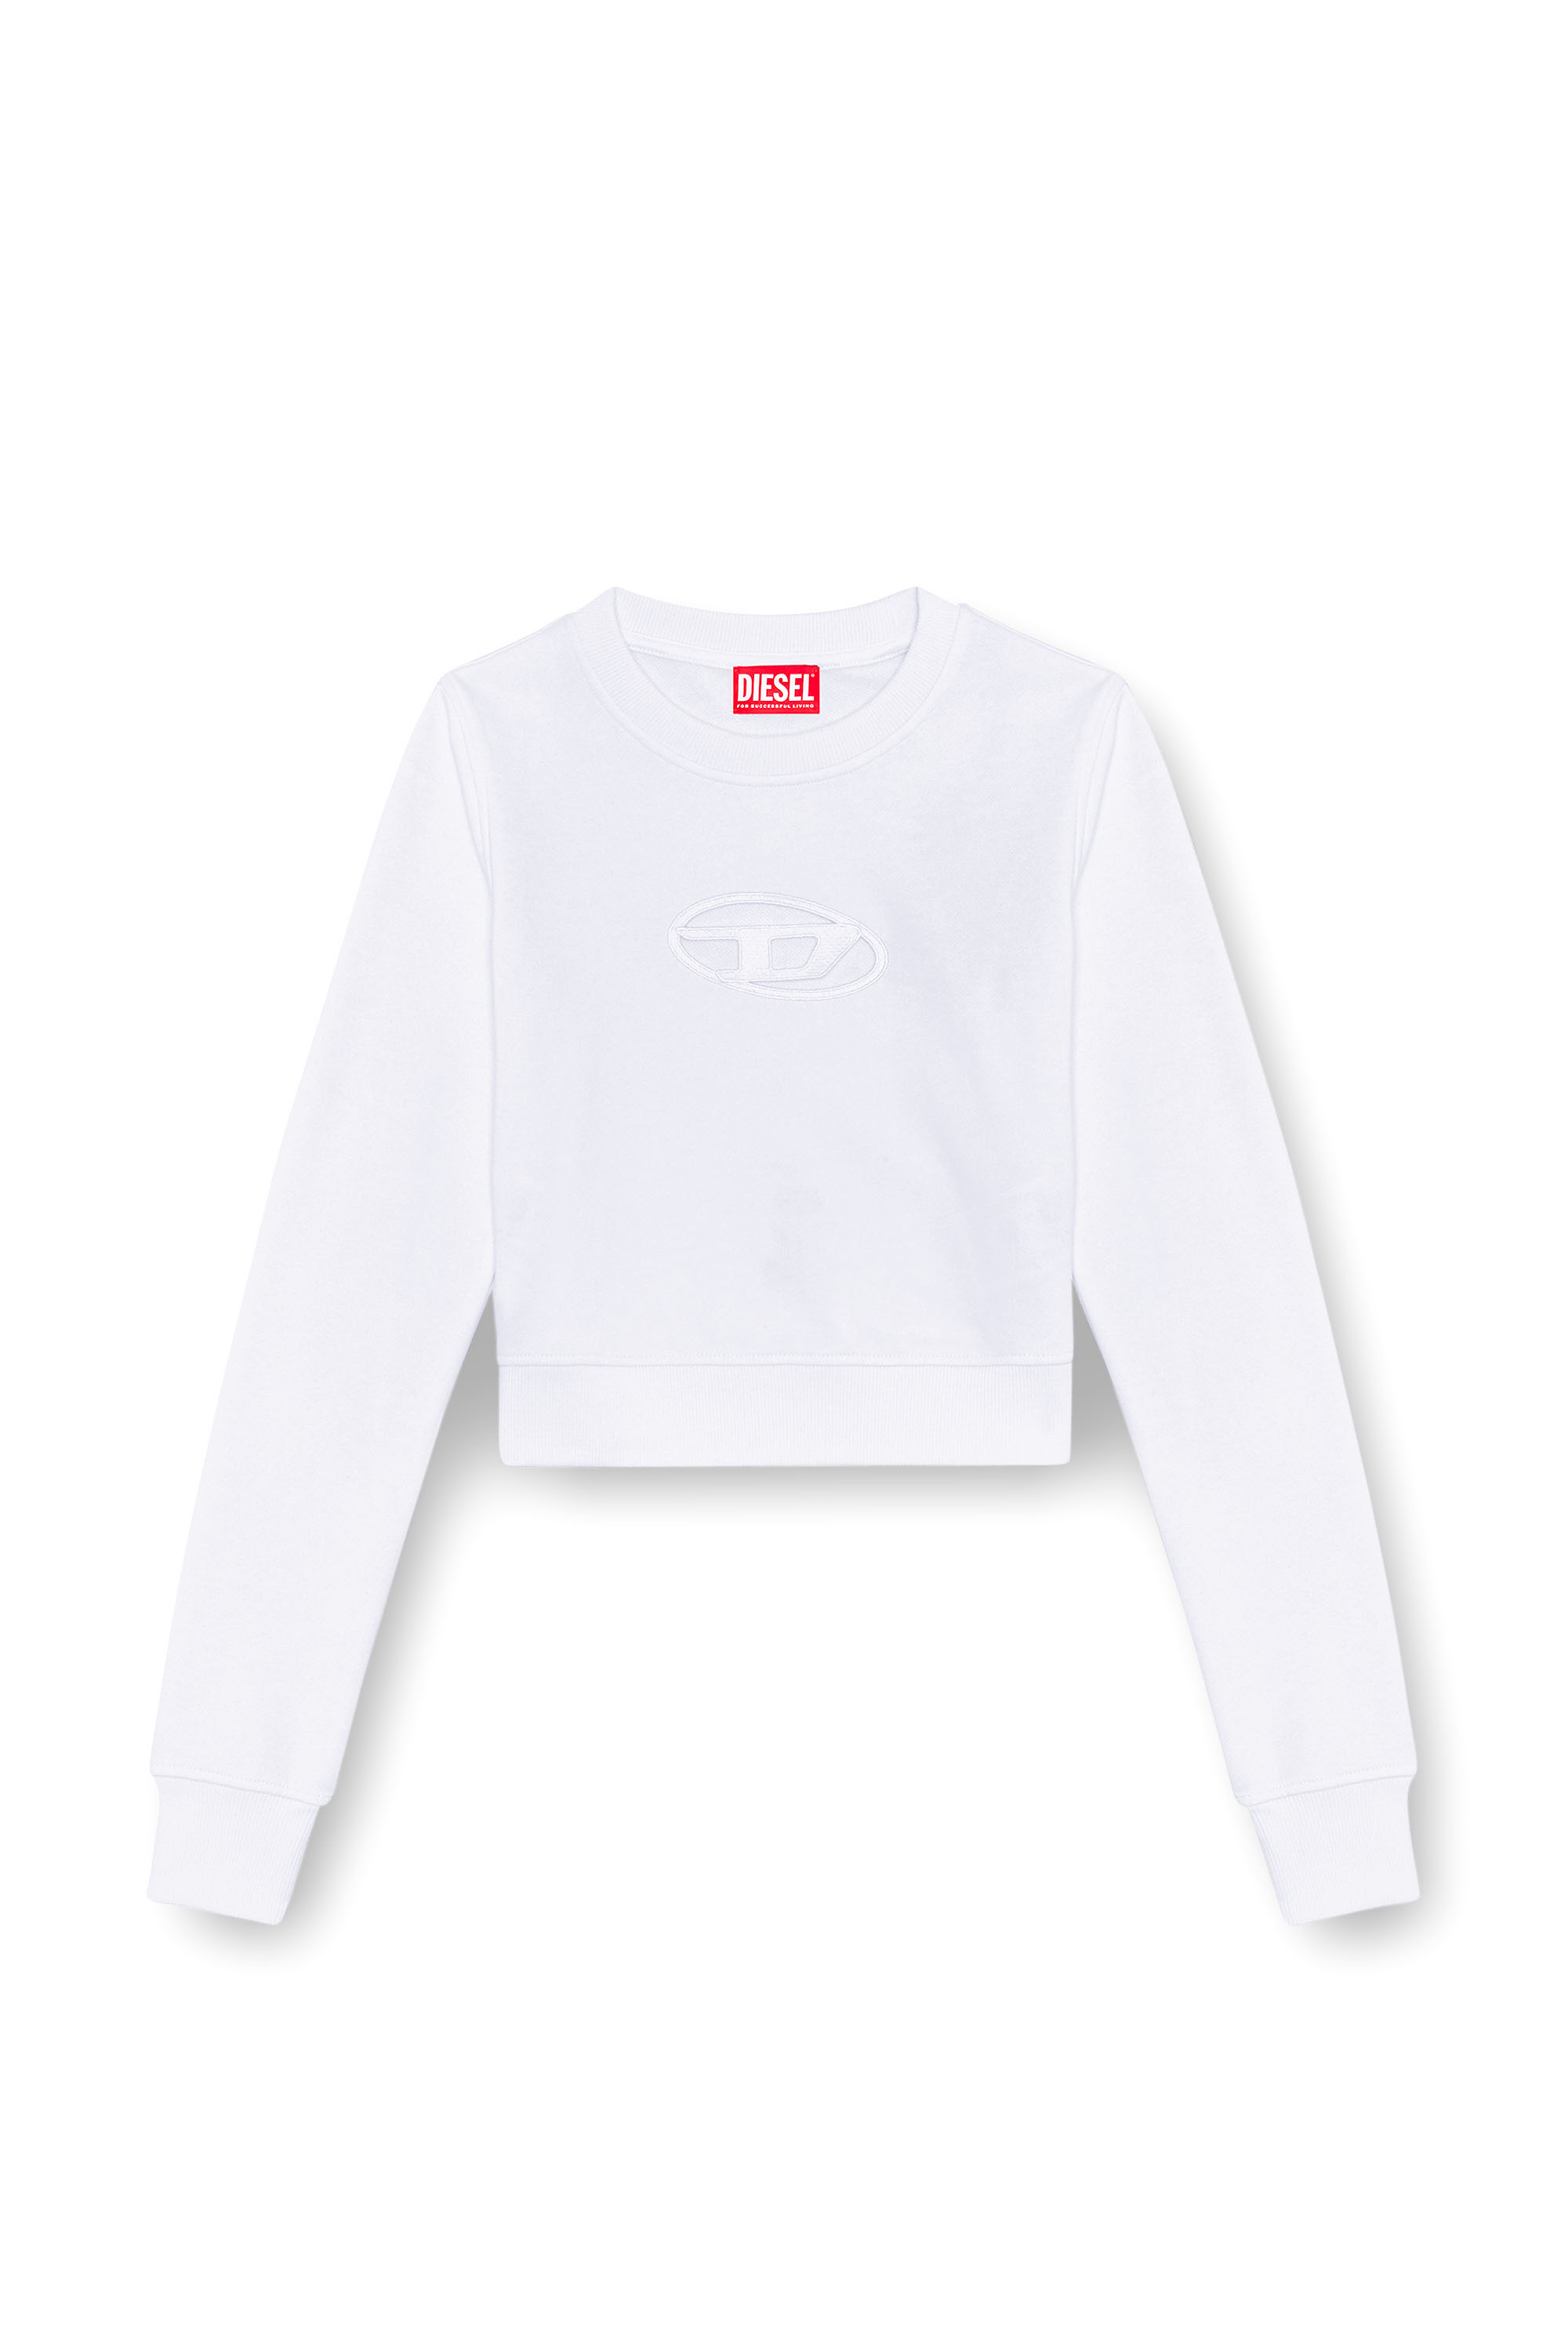 Diesel - F-SLIMMY-OD, Female Cropped sweatshirt with cut-out logo in White - Image 4